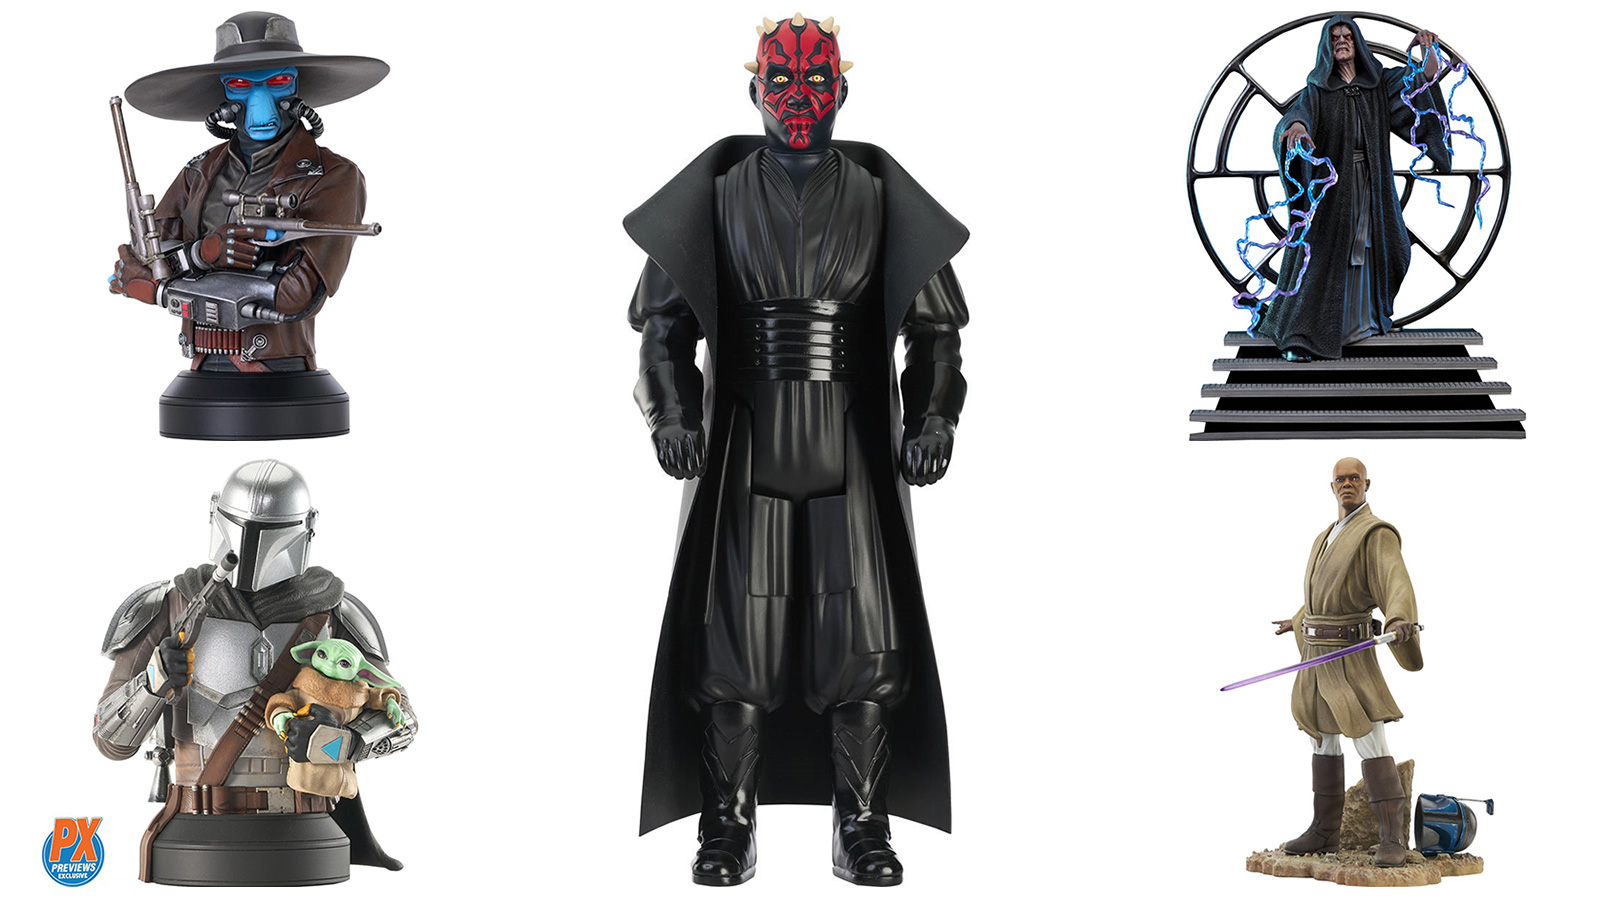 New Preorders At Entertainment Earth - Gentle Giant’s Darth Maul Figure, Mace And Emperor Statues, Cad Bane And The Mandalorian With Grogu Mini-Busts